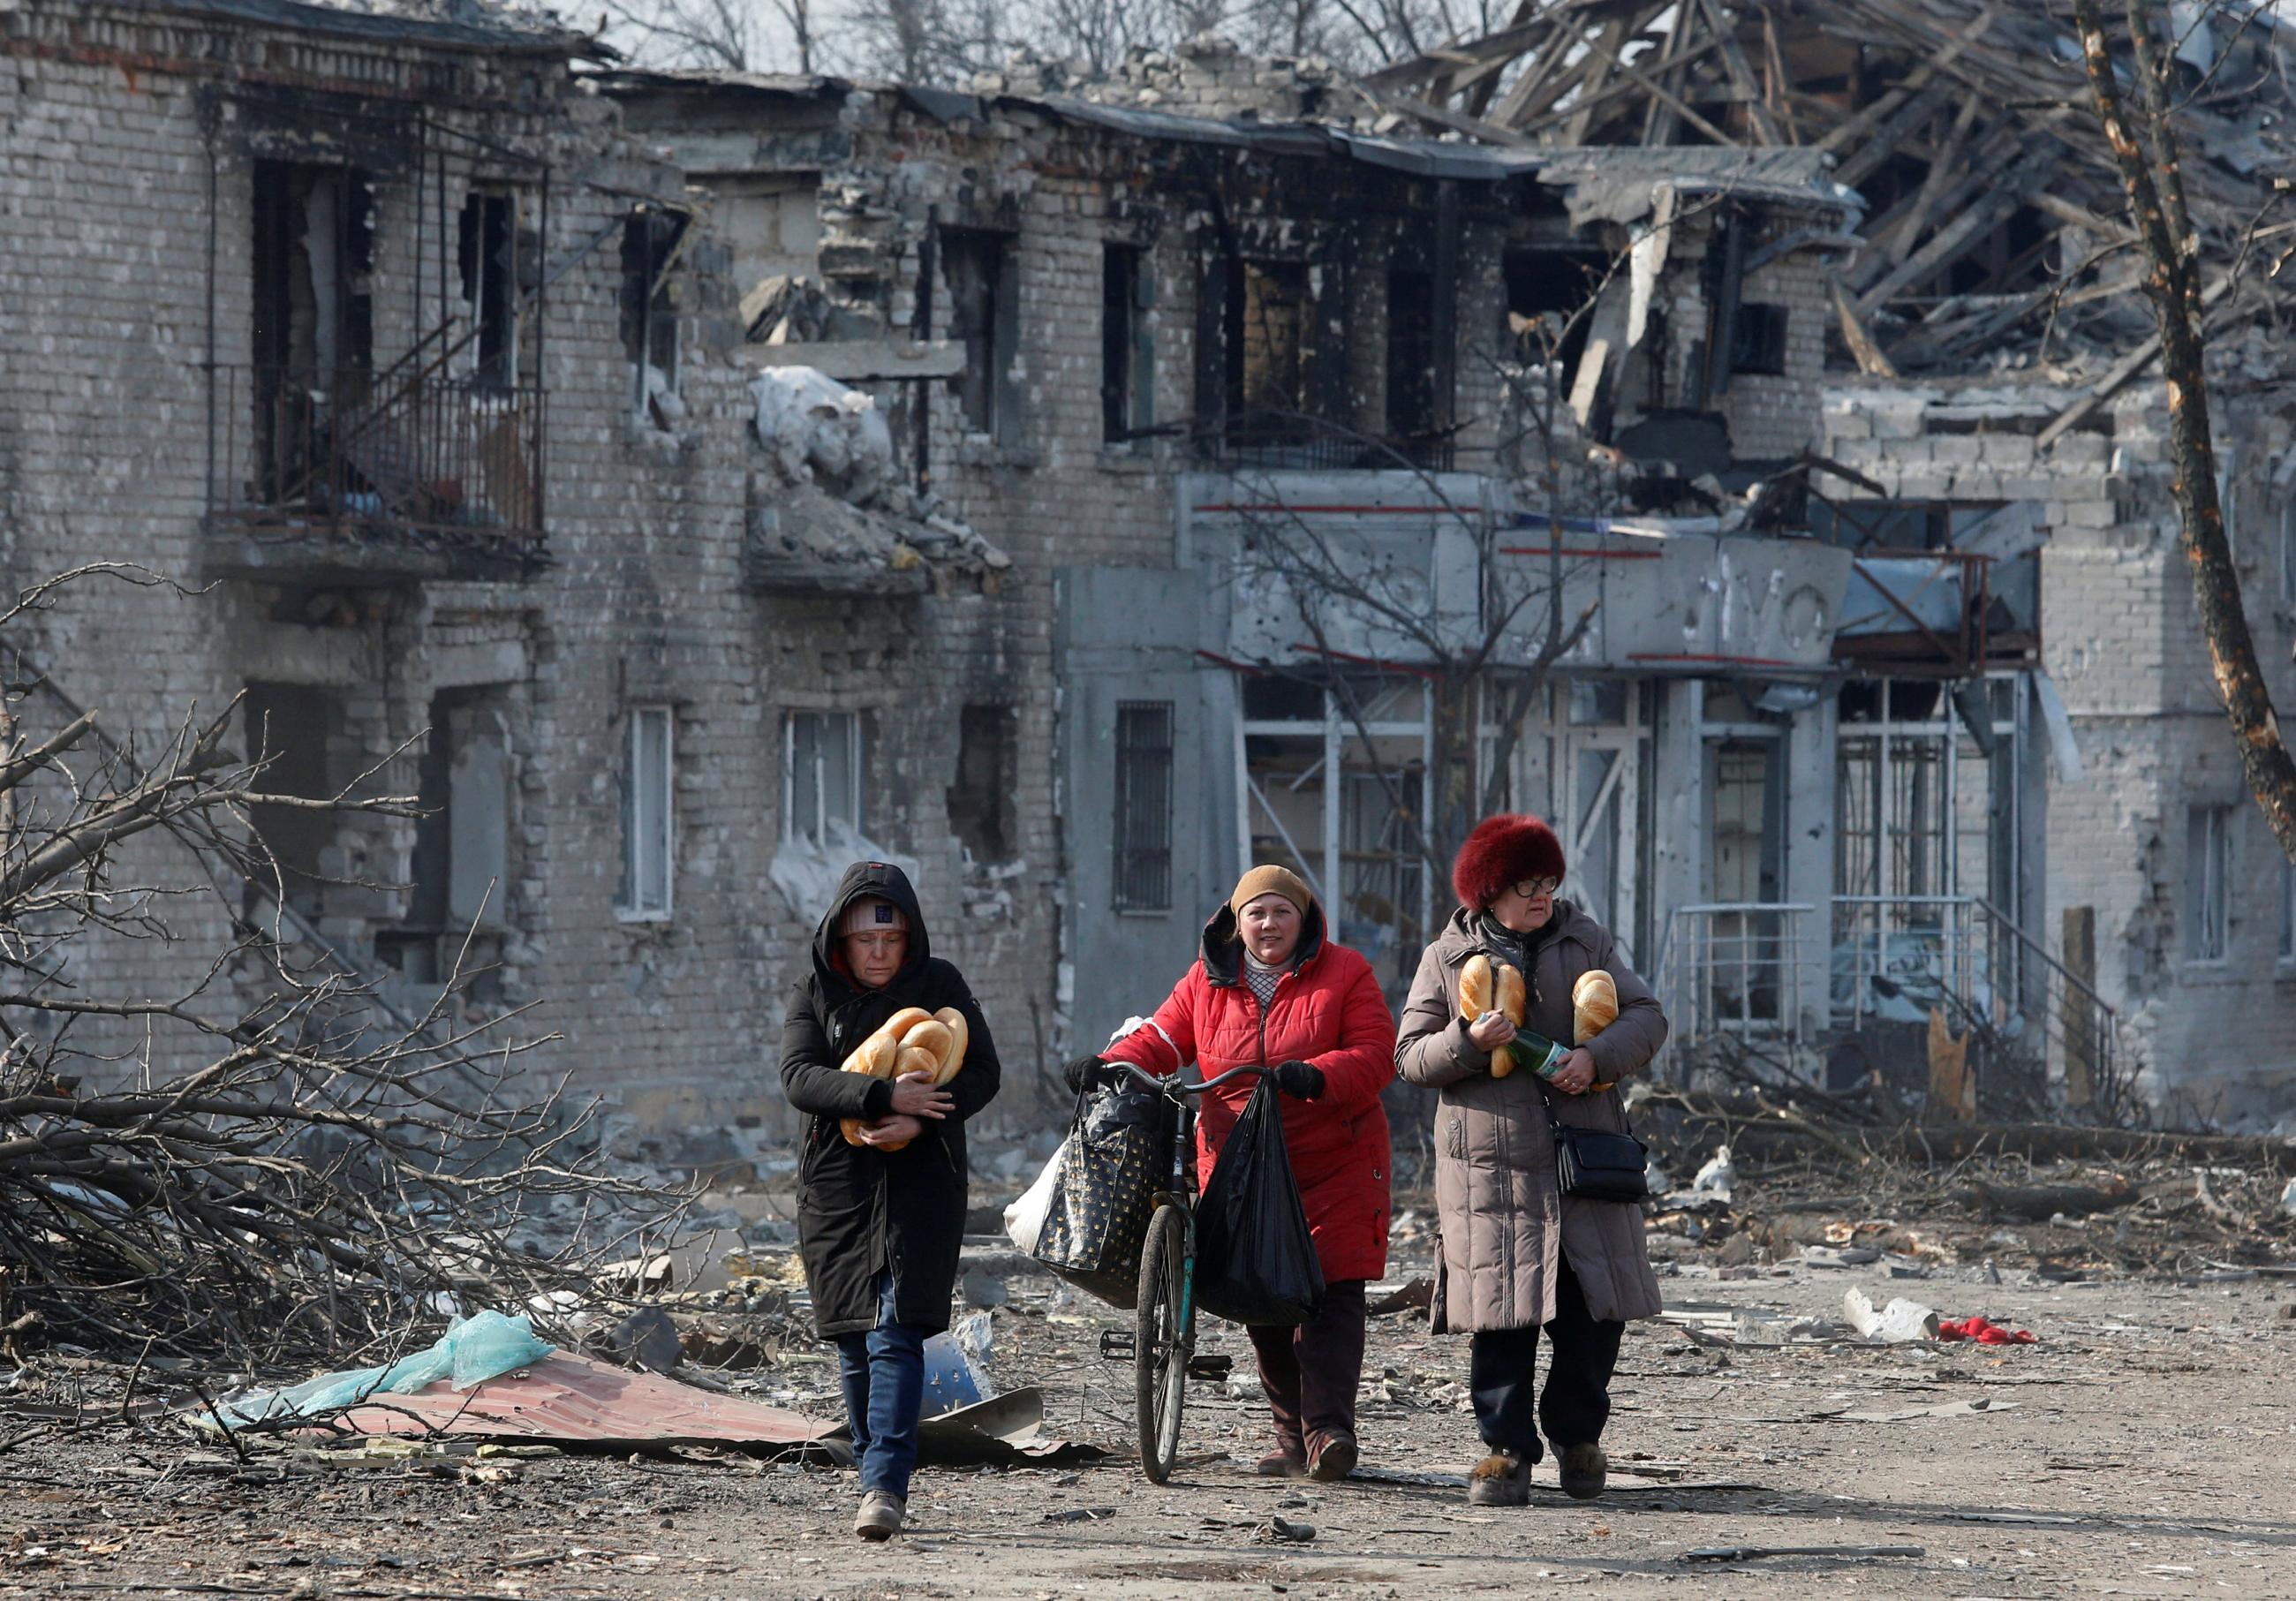 Local residents walk along a street after receiving humanitarian aid during Russia’s attack in the separatist-controlled town of Volnovakha, in the Donetsk region of Ukraine, on March 15, 2022. 